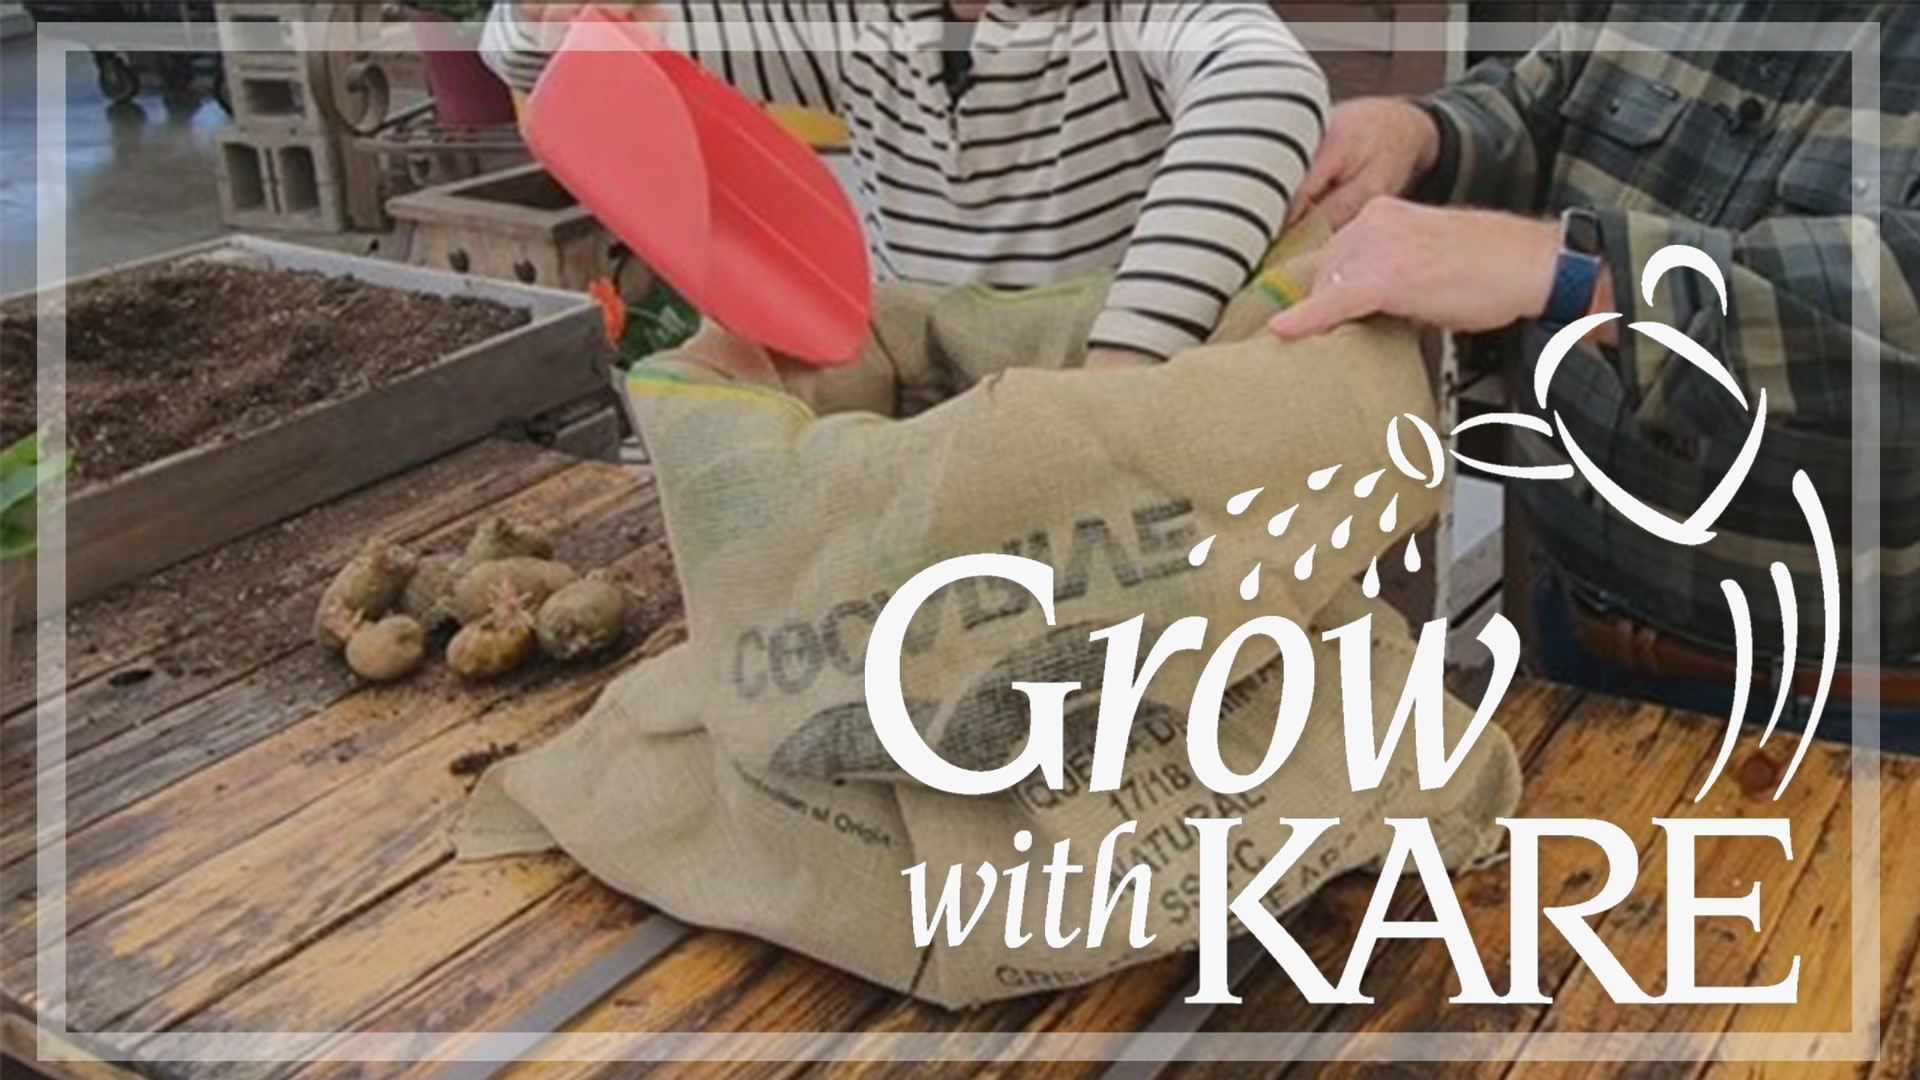 These burlap sacks are usually free from coffee shops and they make a great container for growing potatoes.